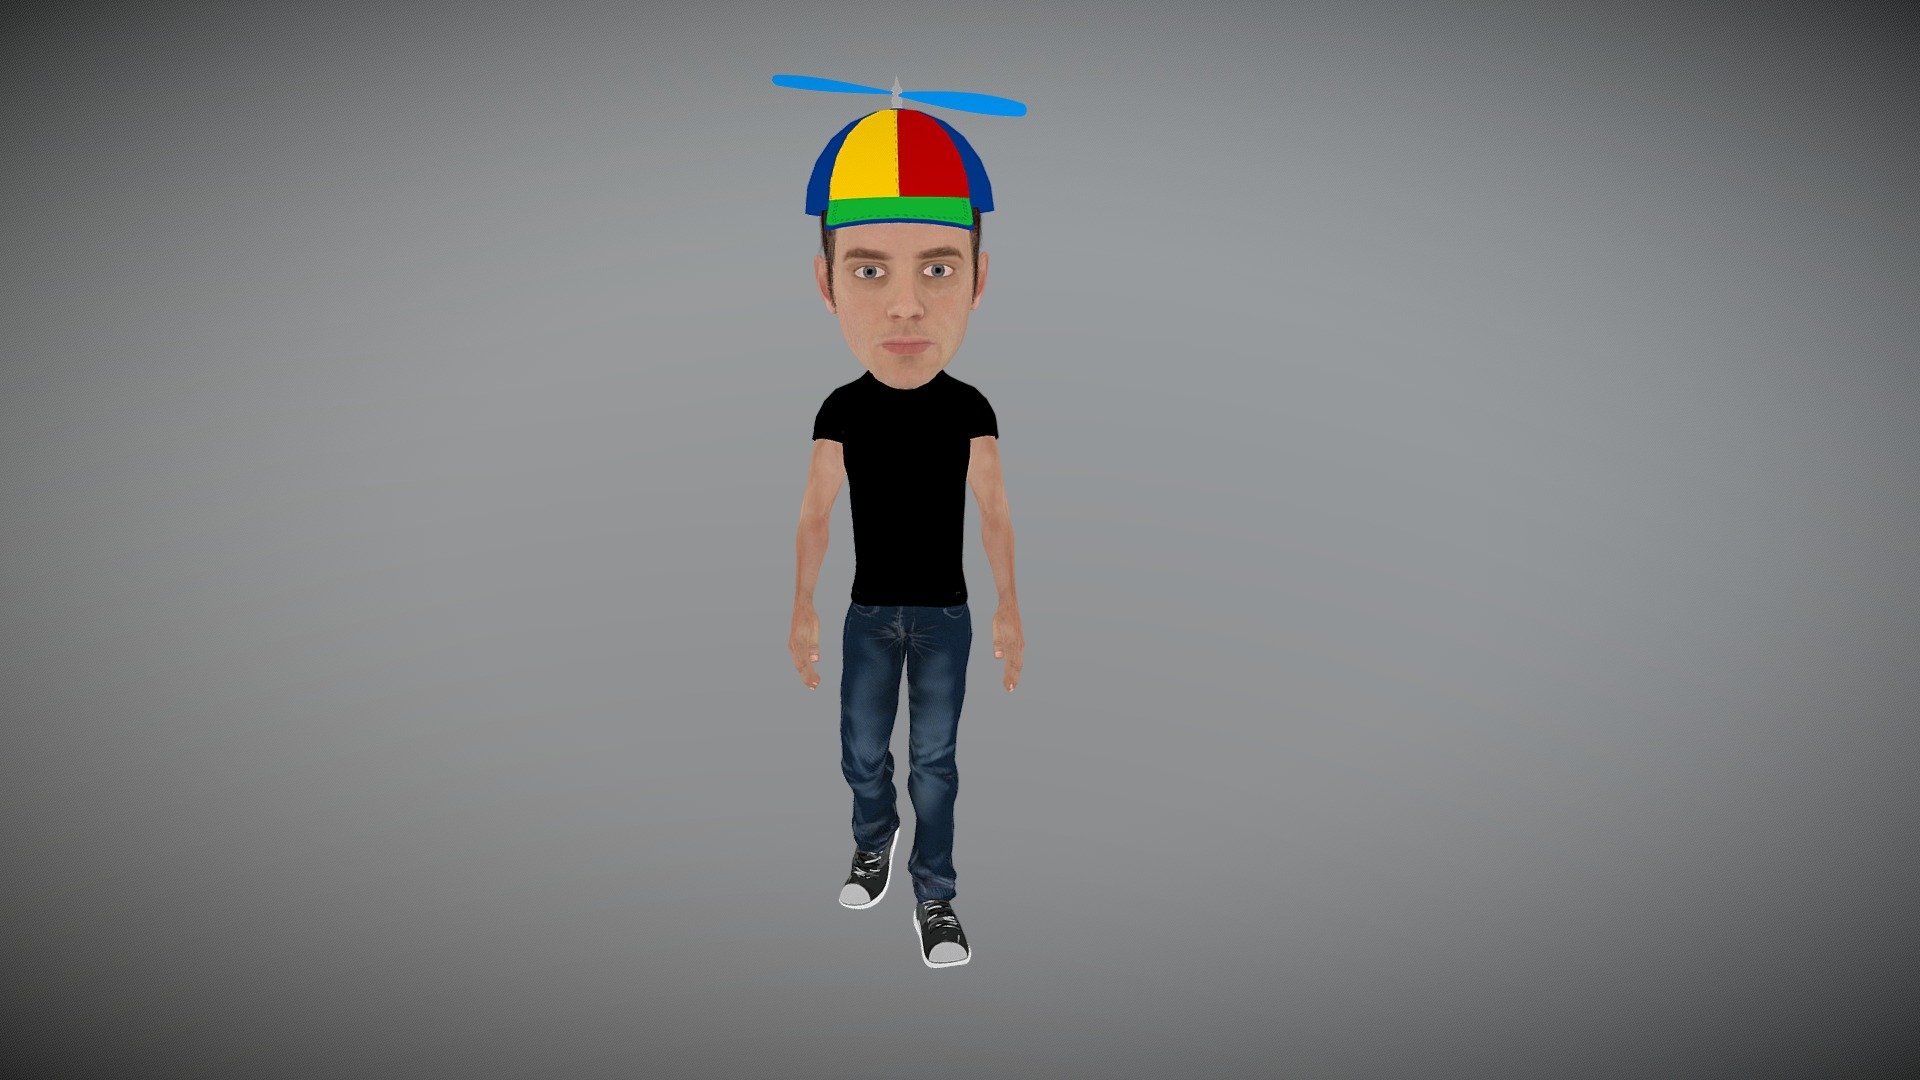 WATCH = https://youtu.be/Mk_OcUQgGbA

3D CHIBI BOBBLE HEAD MAN WITH ANIMATIONS

PACKAGE INCLUDE




High quality polygonal model, correctly scaled for an accurate representation of the original object.

Model is built to real-world scale.

Many different format like blender, fbx, obj, iclone, dae

No additional plugin is needed to open the model.

3d print ready in different poses

Separate Loopable Animations

Ready for animation

High Quality materials and textures

Triangles = 78920

Vertices = 52210

Edges = 101819

Faces = 59929

ANIMATIONS




Idle

Walk

Run

Fight

Dance

+Many different 3d Print Poses
 - BOBBLE HEAD MAN WITH MOTIONS - Buy Royalty Free 3D model by Bilal Creation Production (@bilalcreation) 3d model